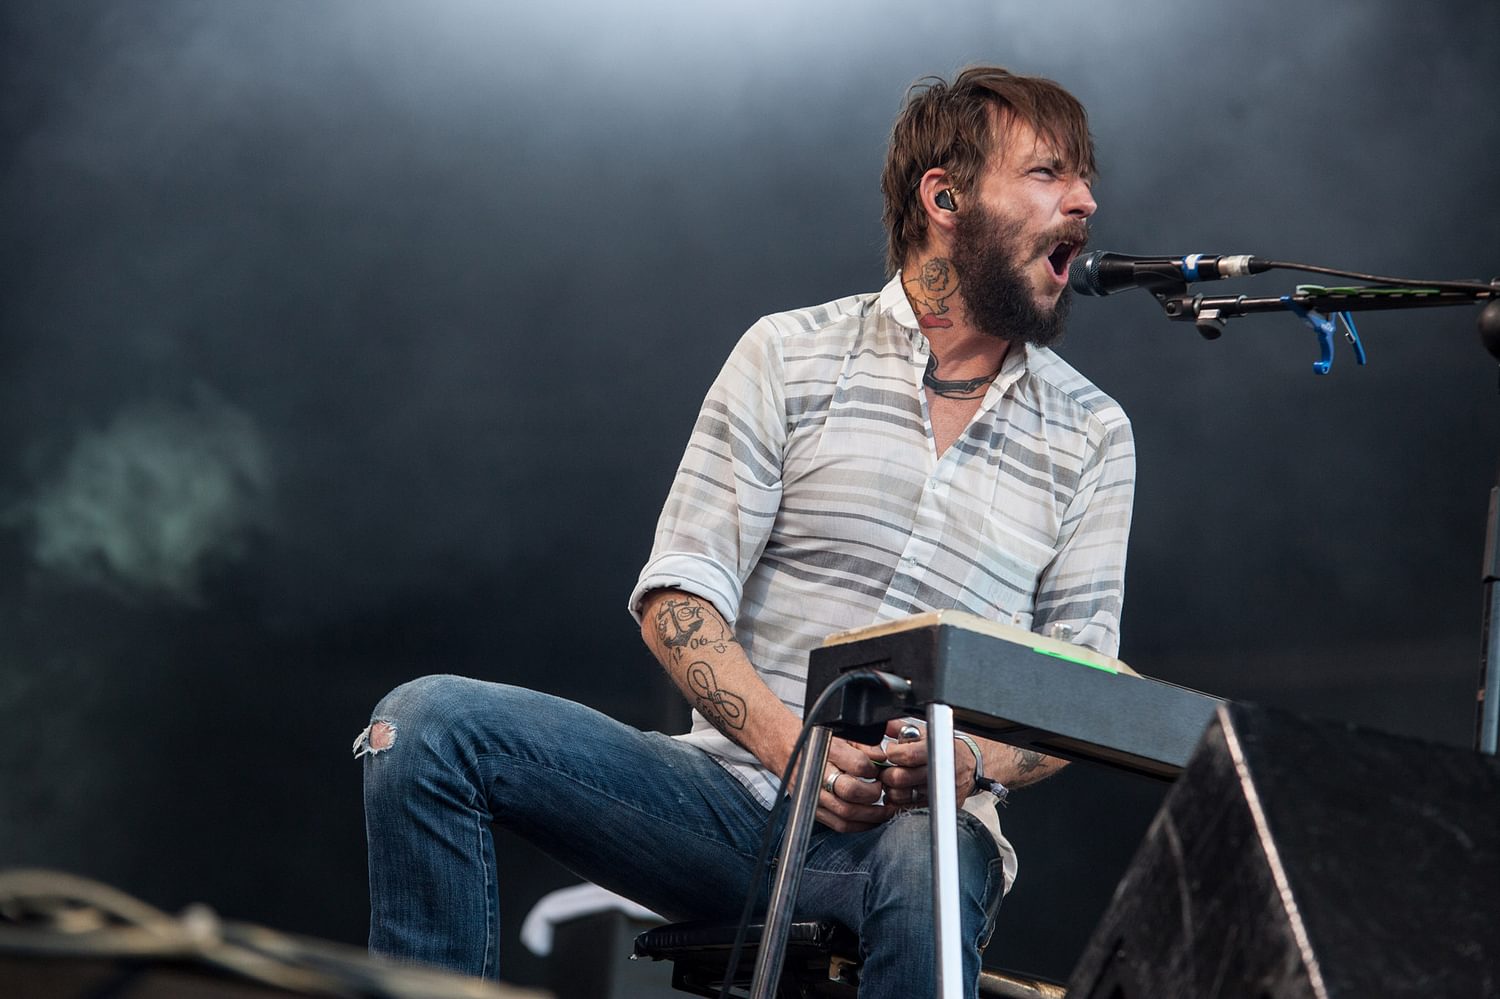 Band Of Horses: "There are no rules now"